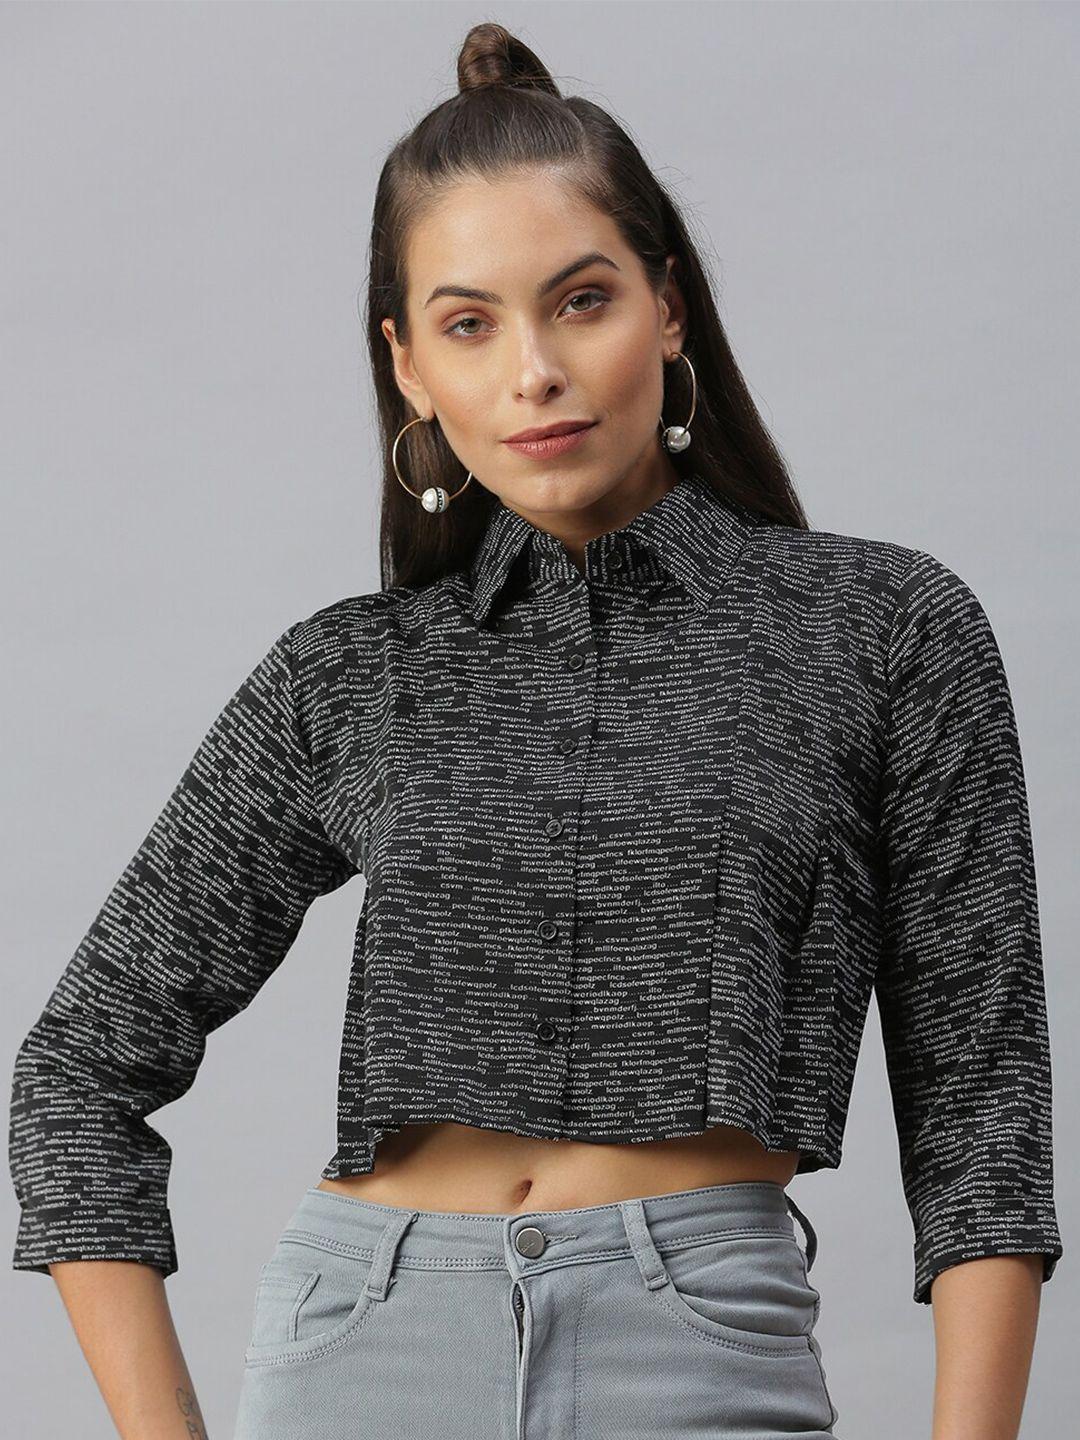 showoff--comfort-typography-printed-pleated-spread-collar-crop-boxy-casual-shirt